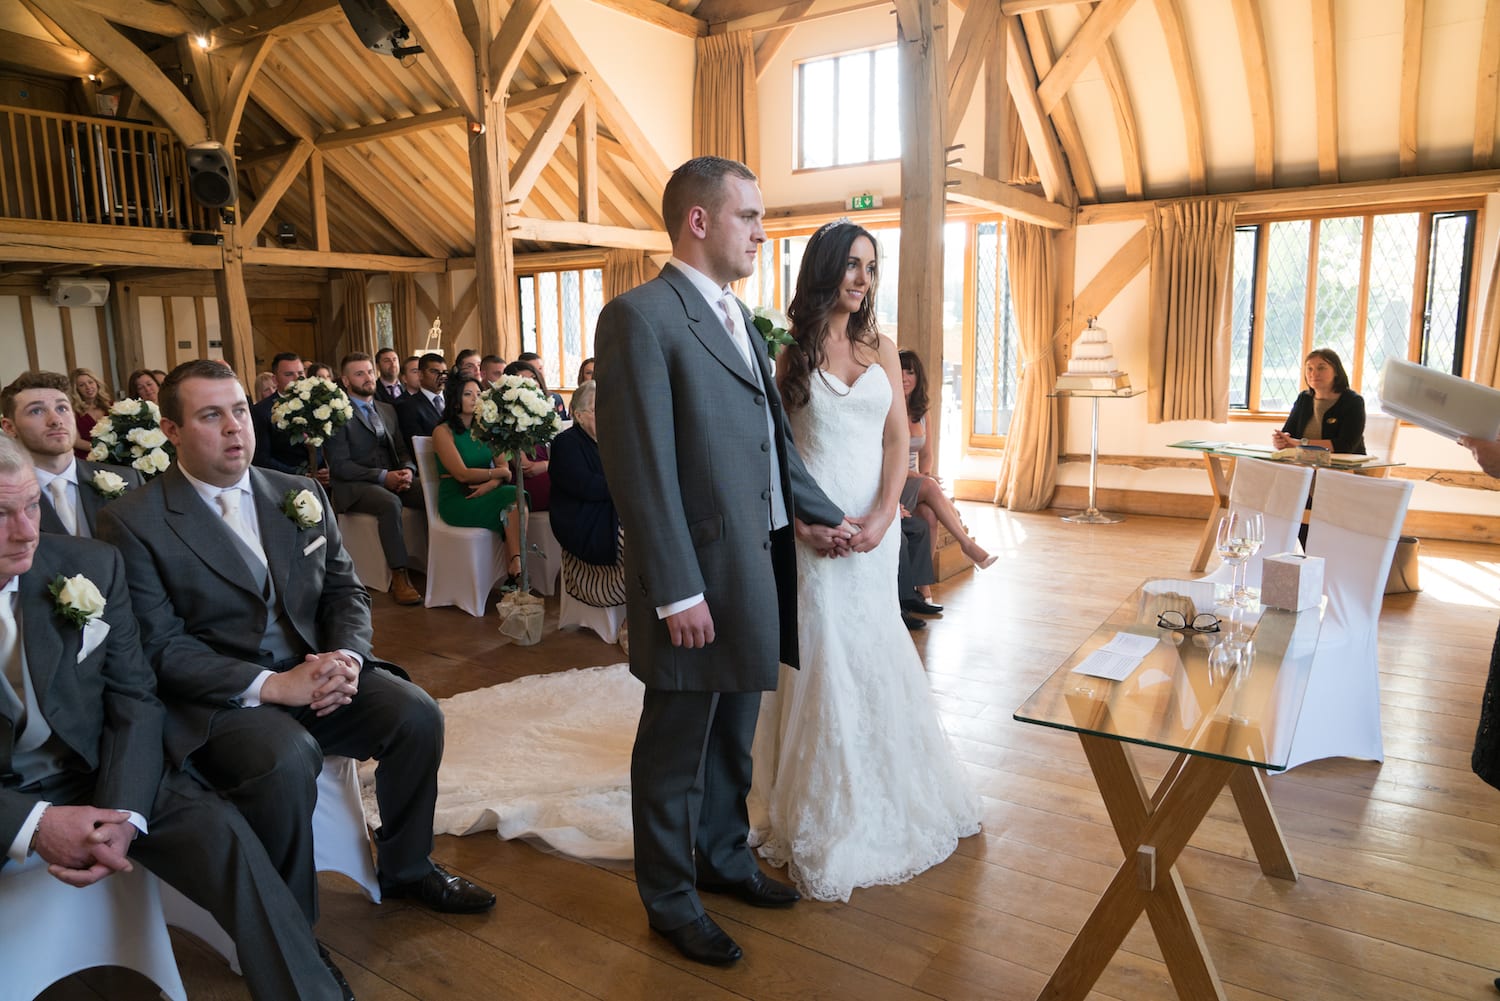 long cathedral train wedding dress ceremony Cain Manor barn